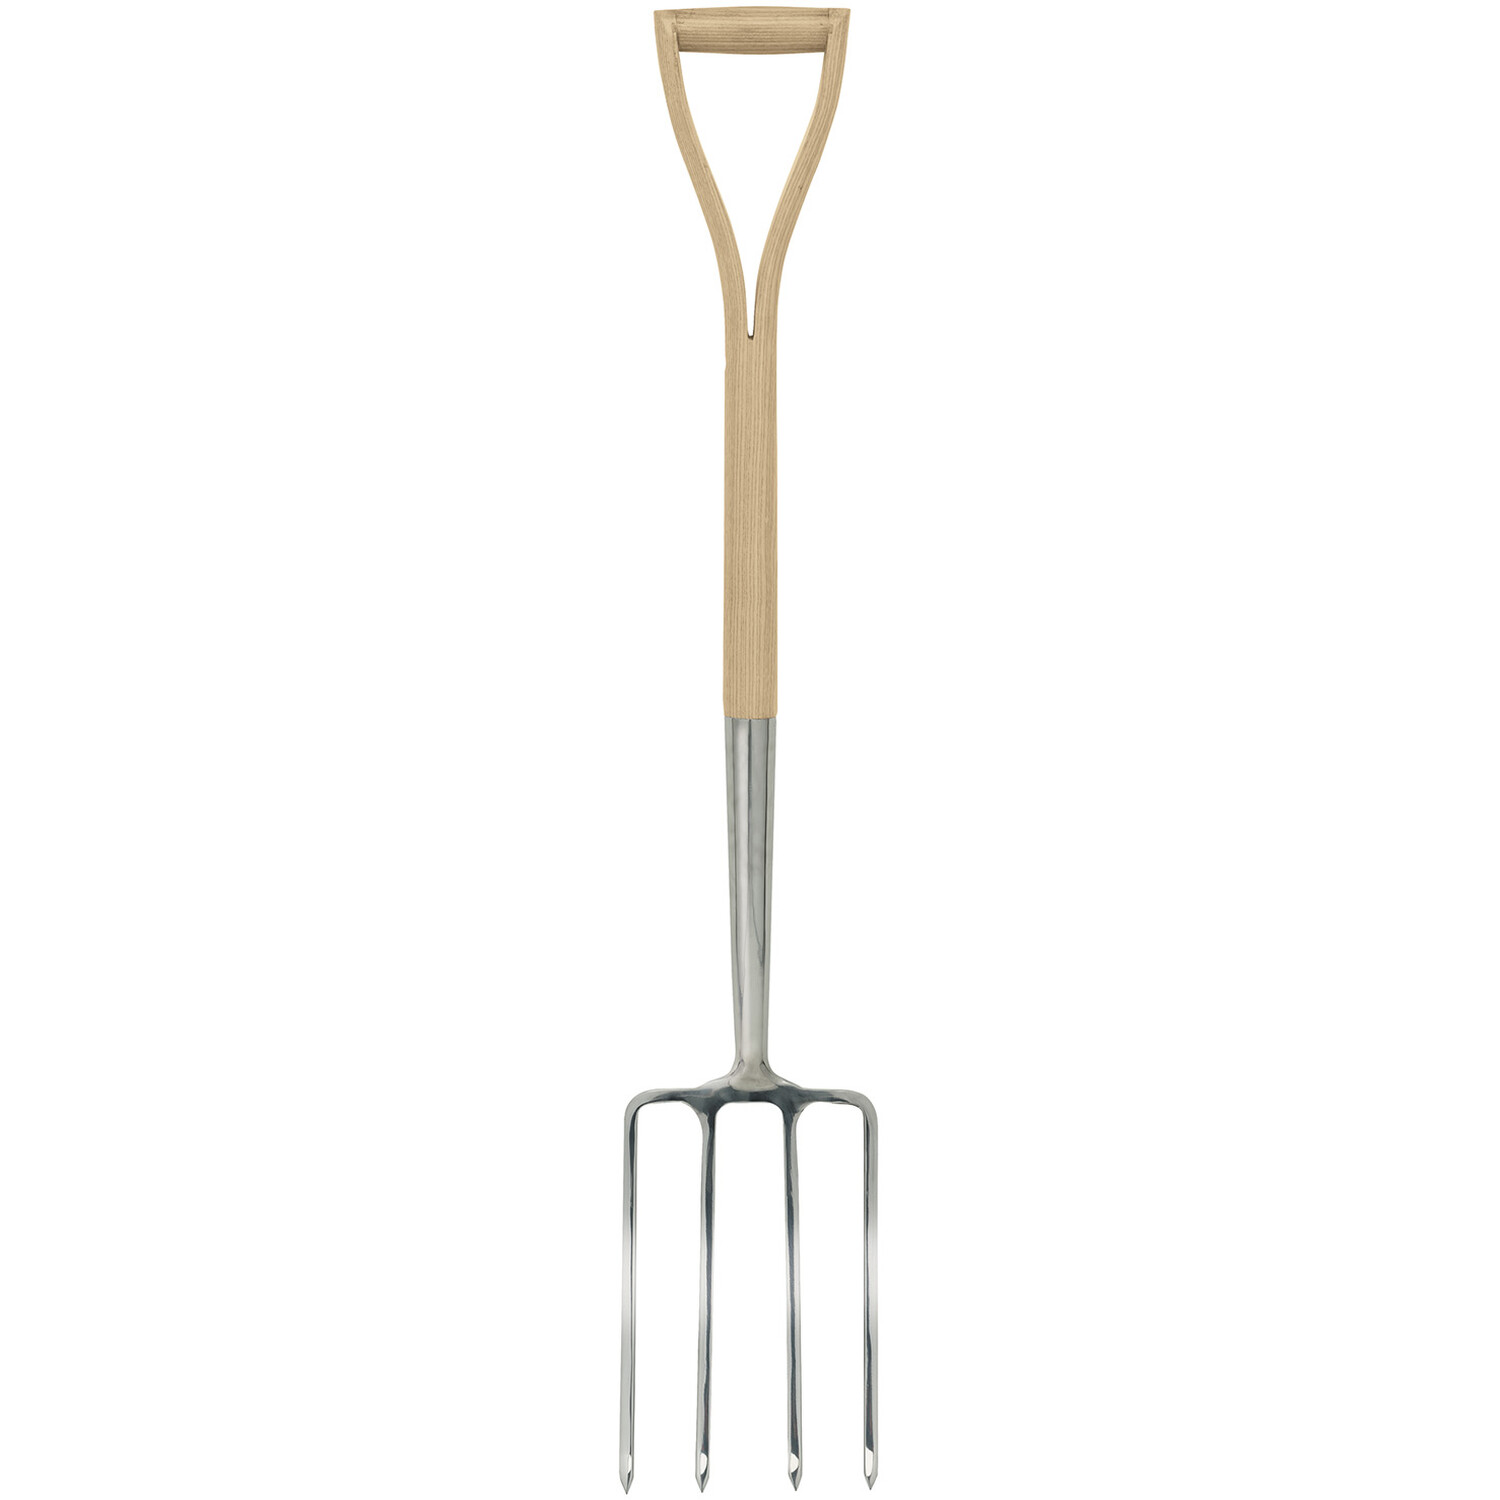 Draper Stainless Steel Digging Fork With Ash Handle Image 1